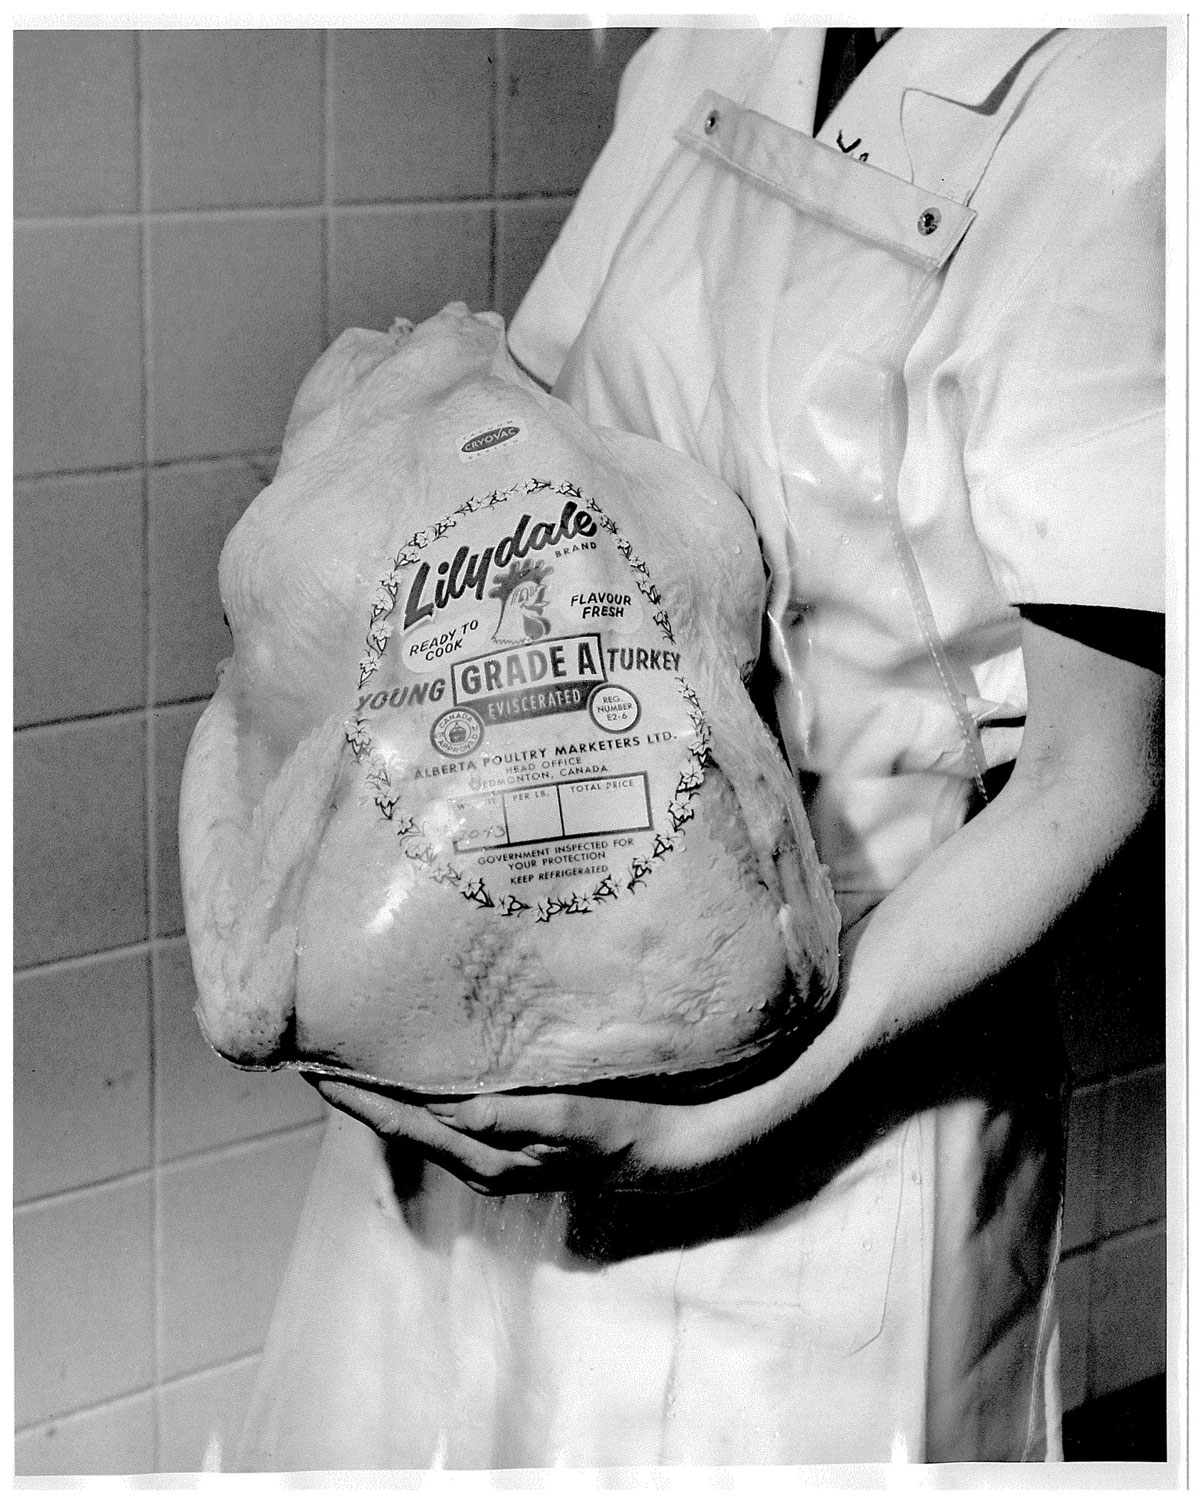 Lilydale Turkey in the 1950's